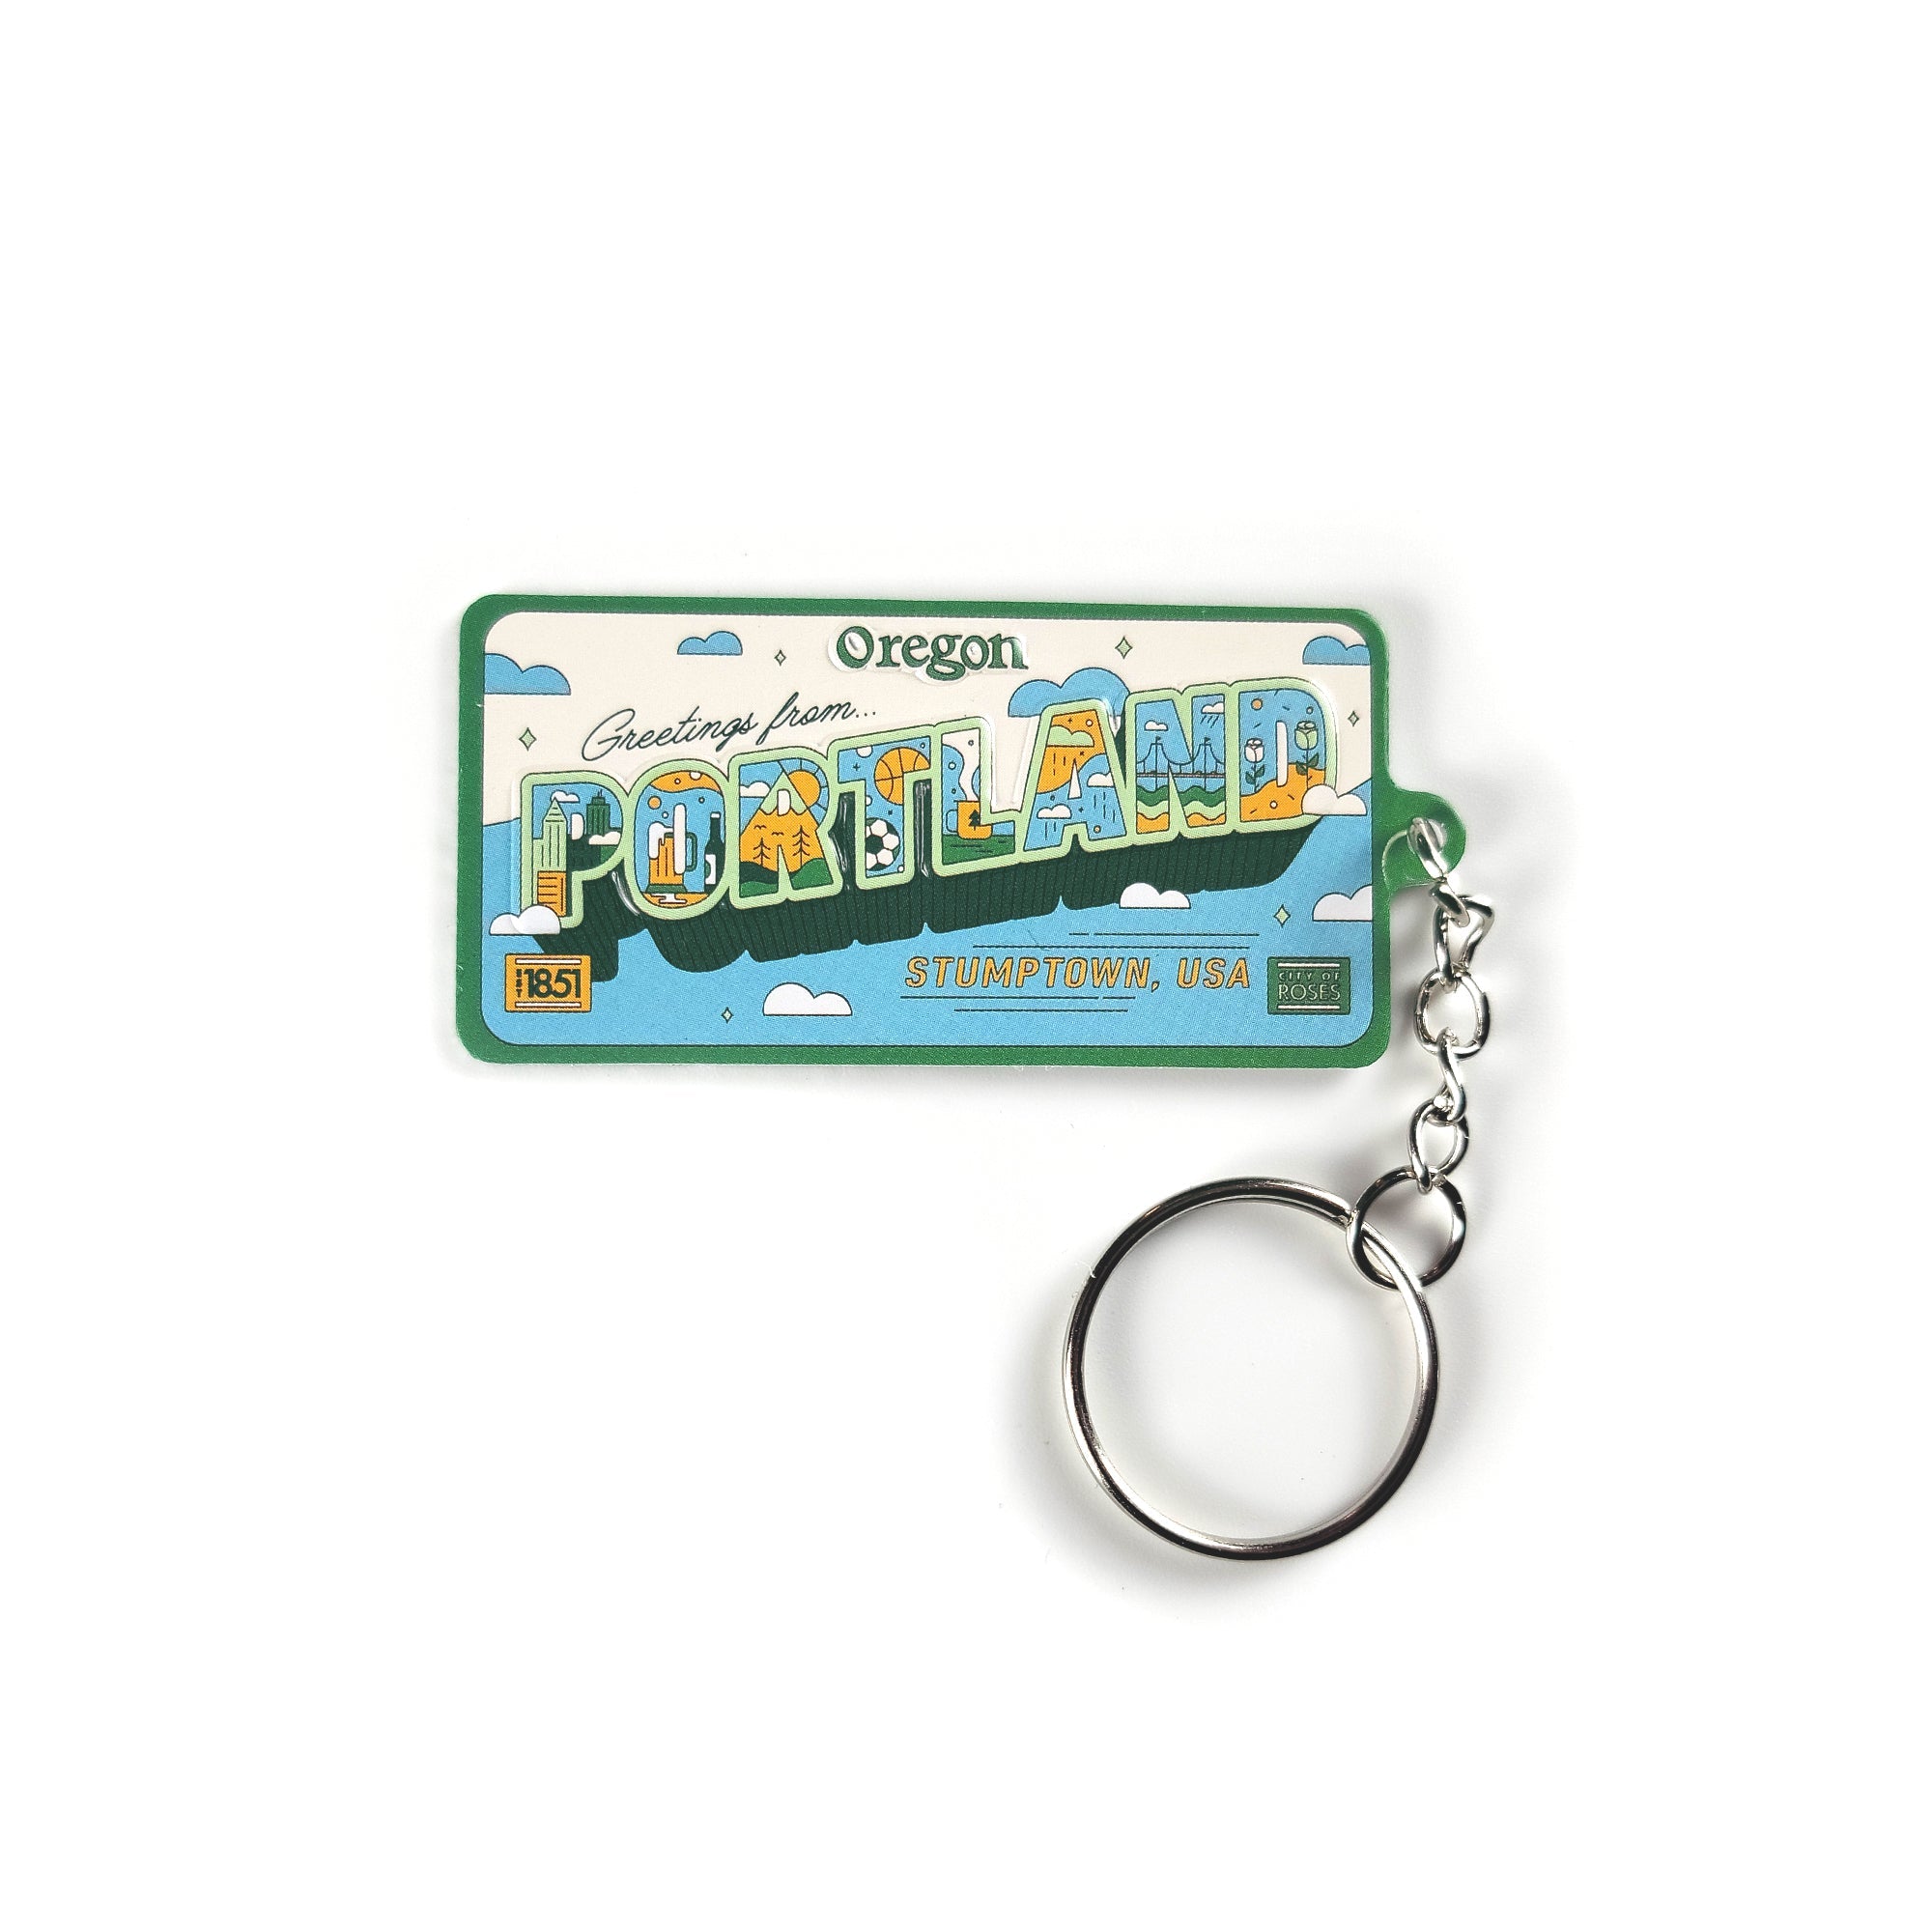 Greetings From Portland License Plate Keychain - Keychains - Hello From Portland